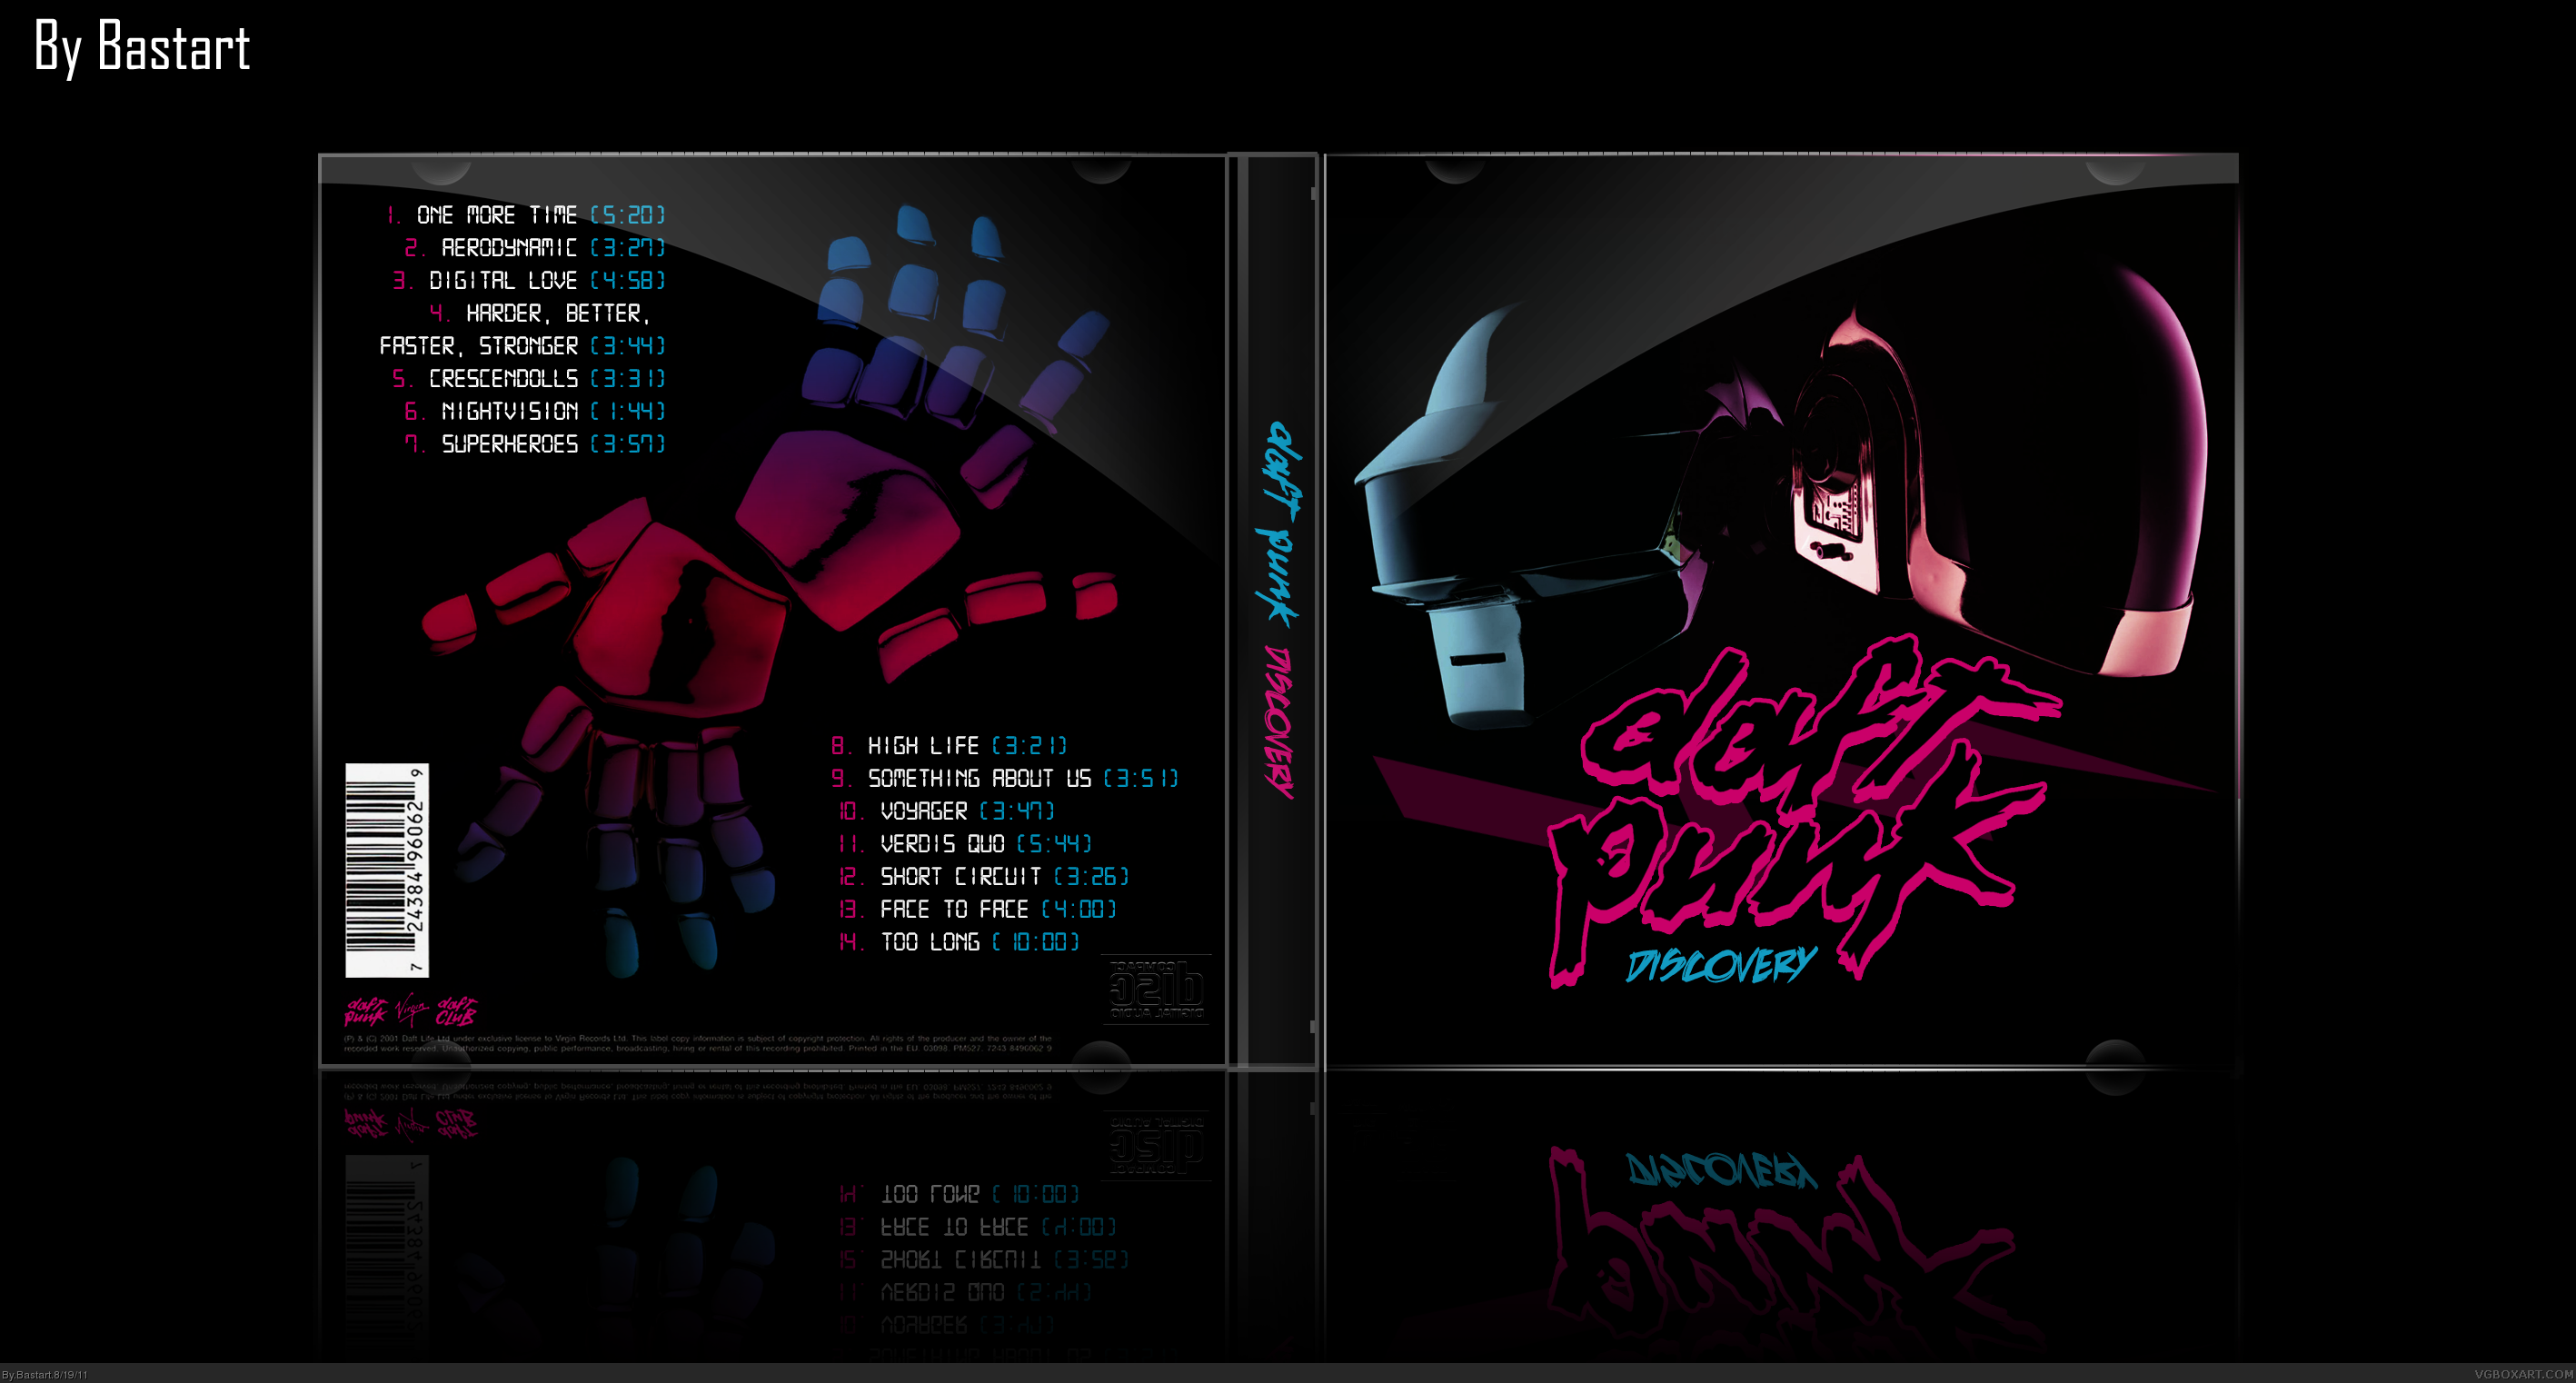 Daft Punk: Discovery box cover